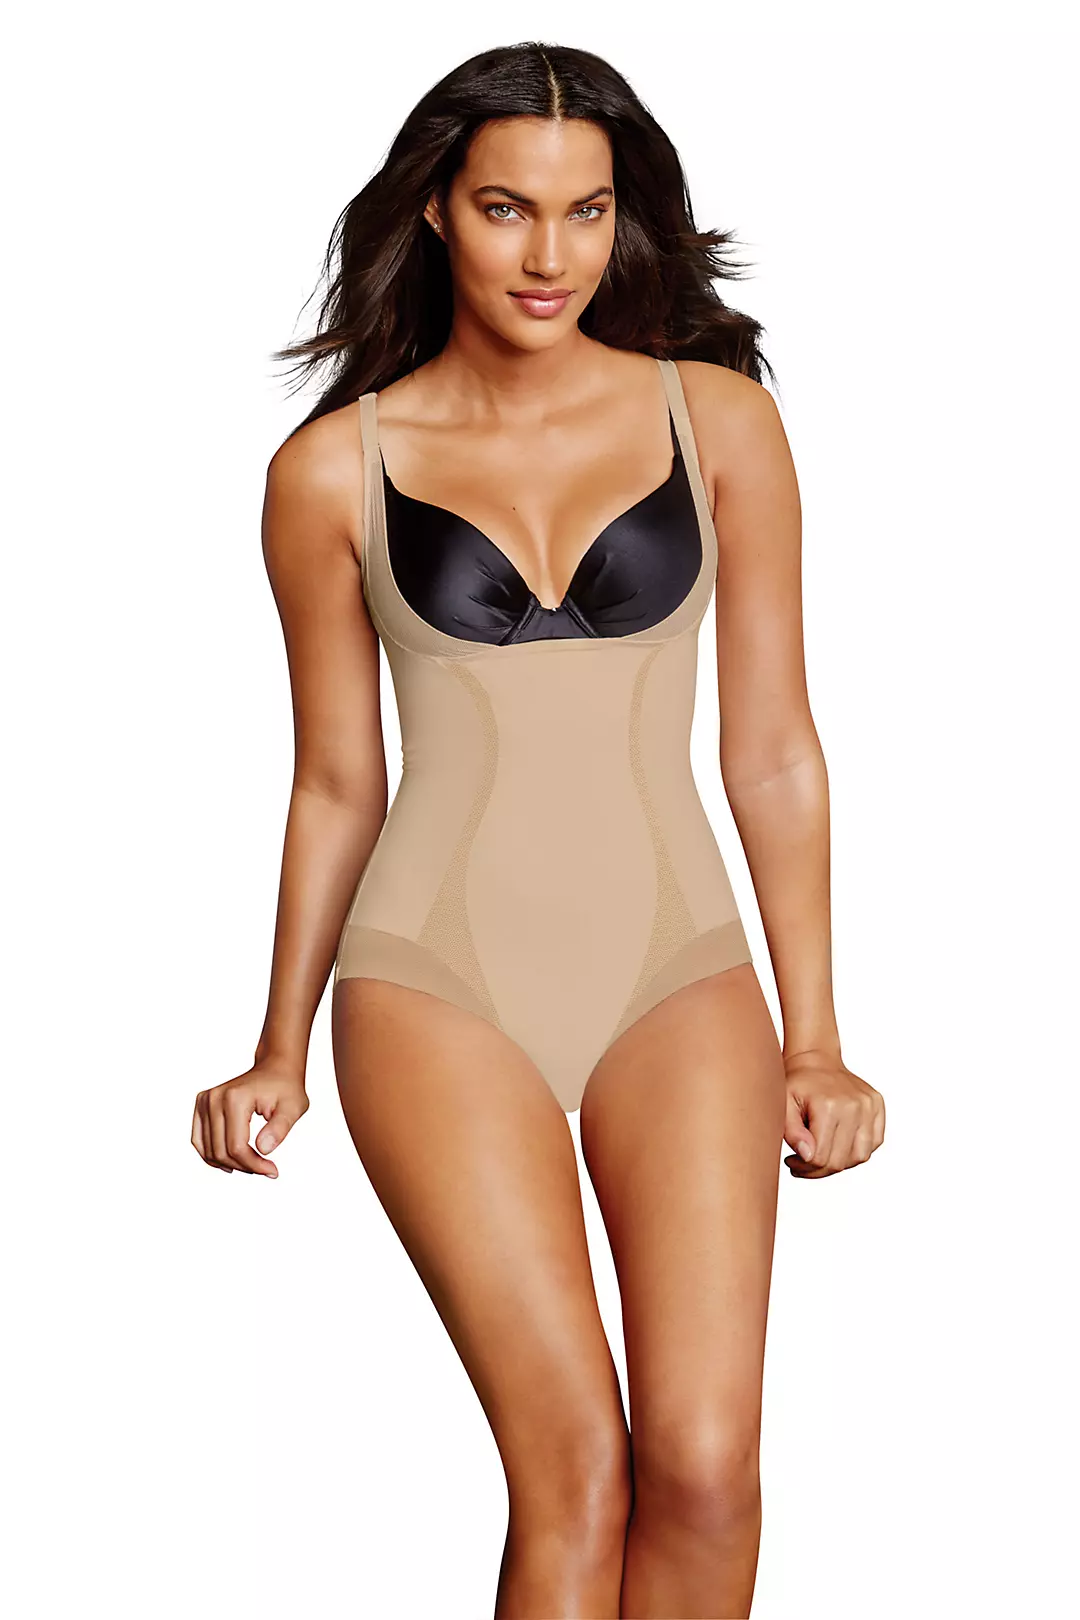 Maidenform Firm Foundations Open Bust Bodybriefer Image